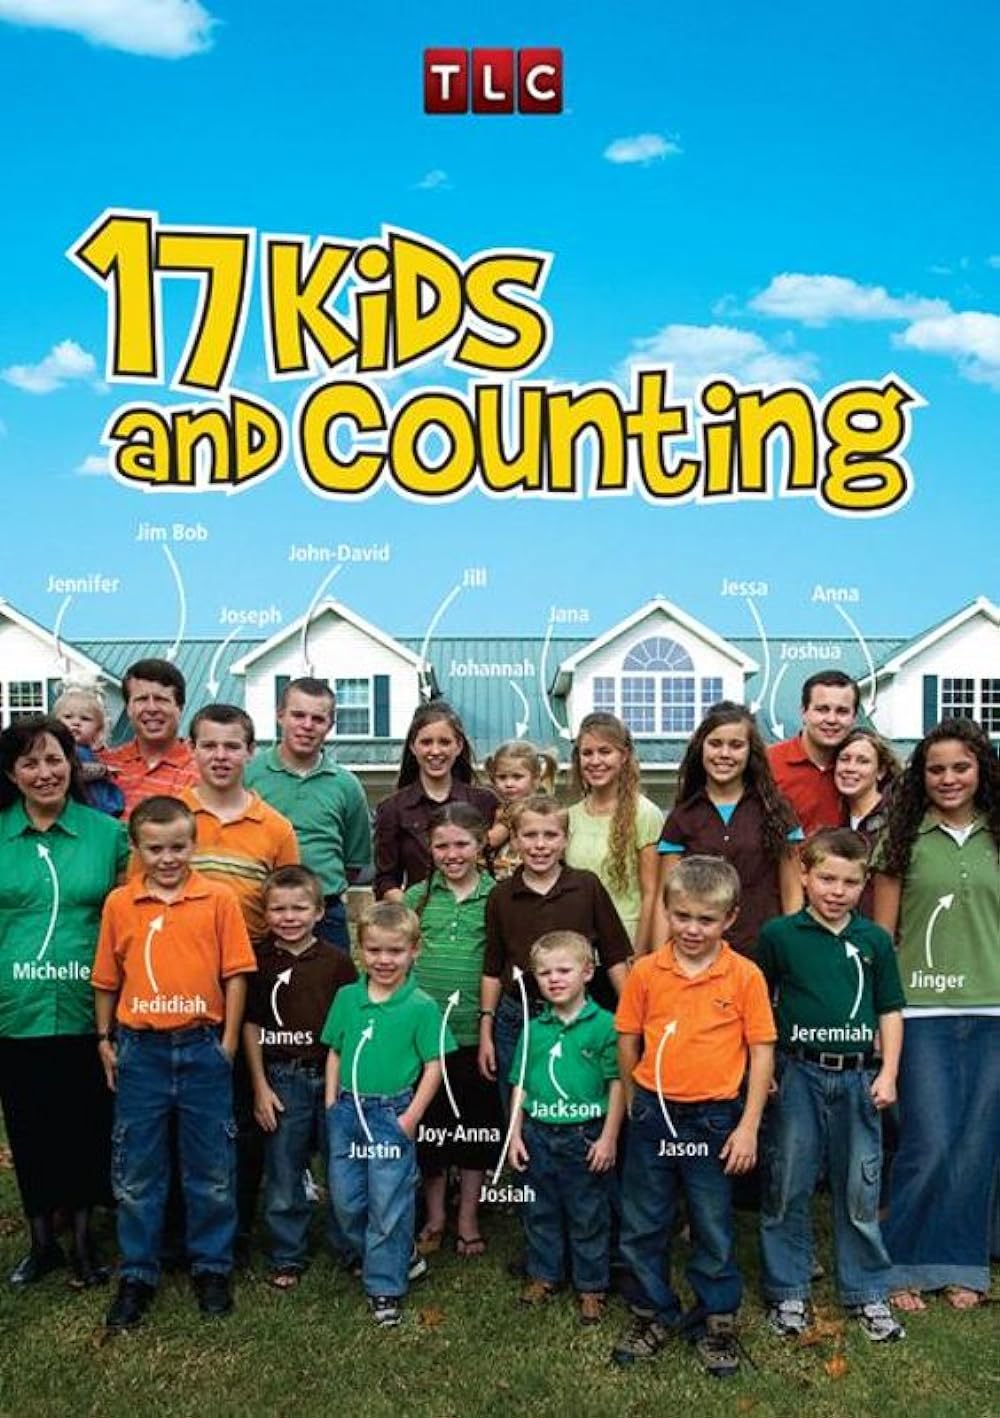 19 Kids and Counting